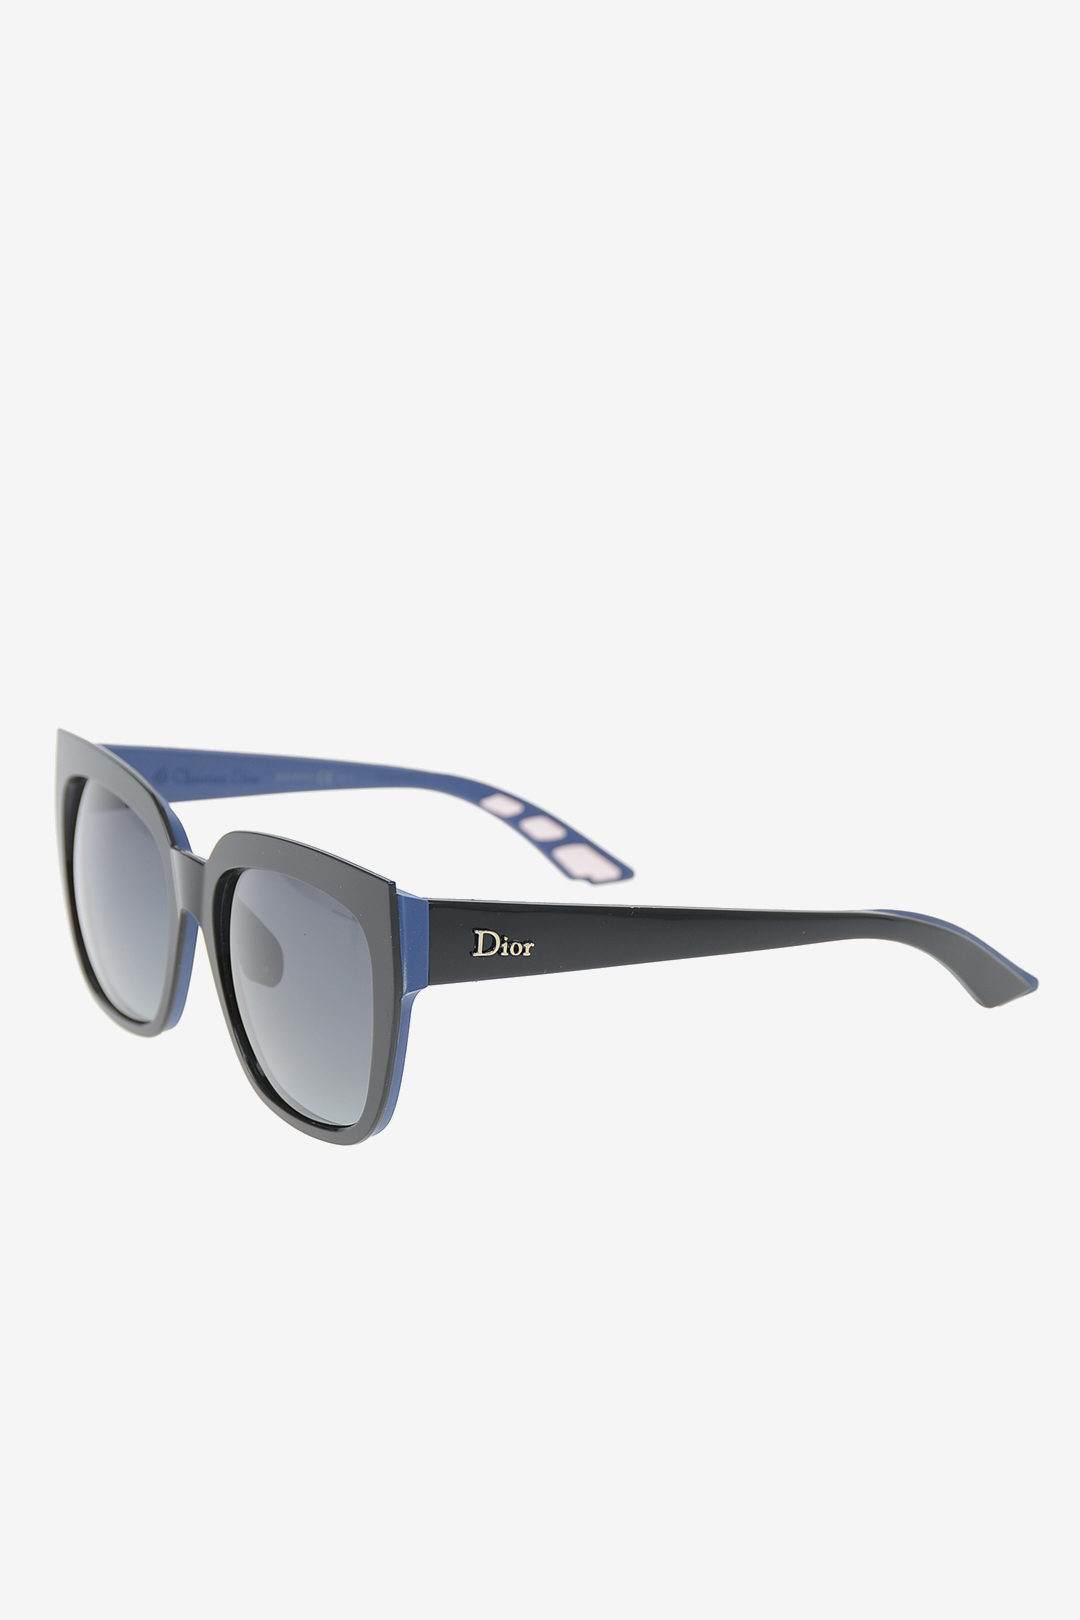 Dior Butterfly DIORDECALE2F Sunglasses 